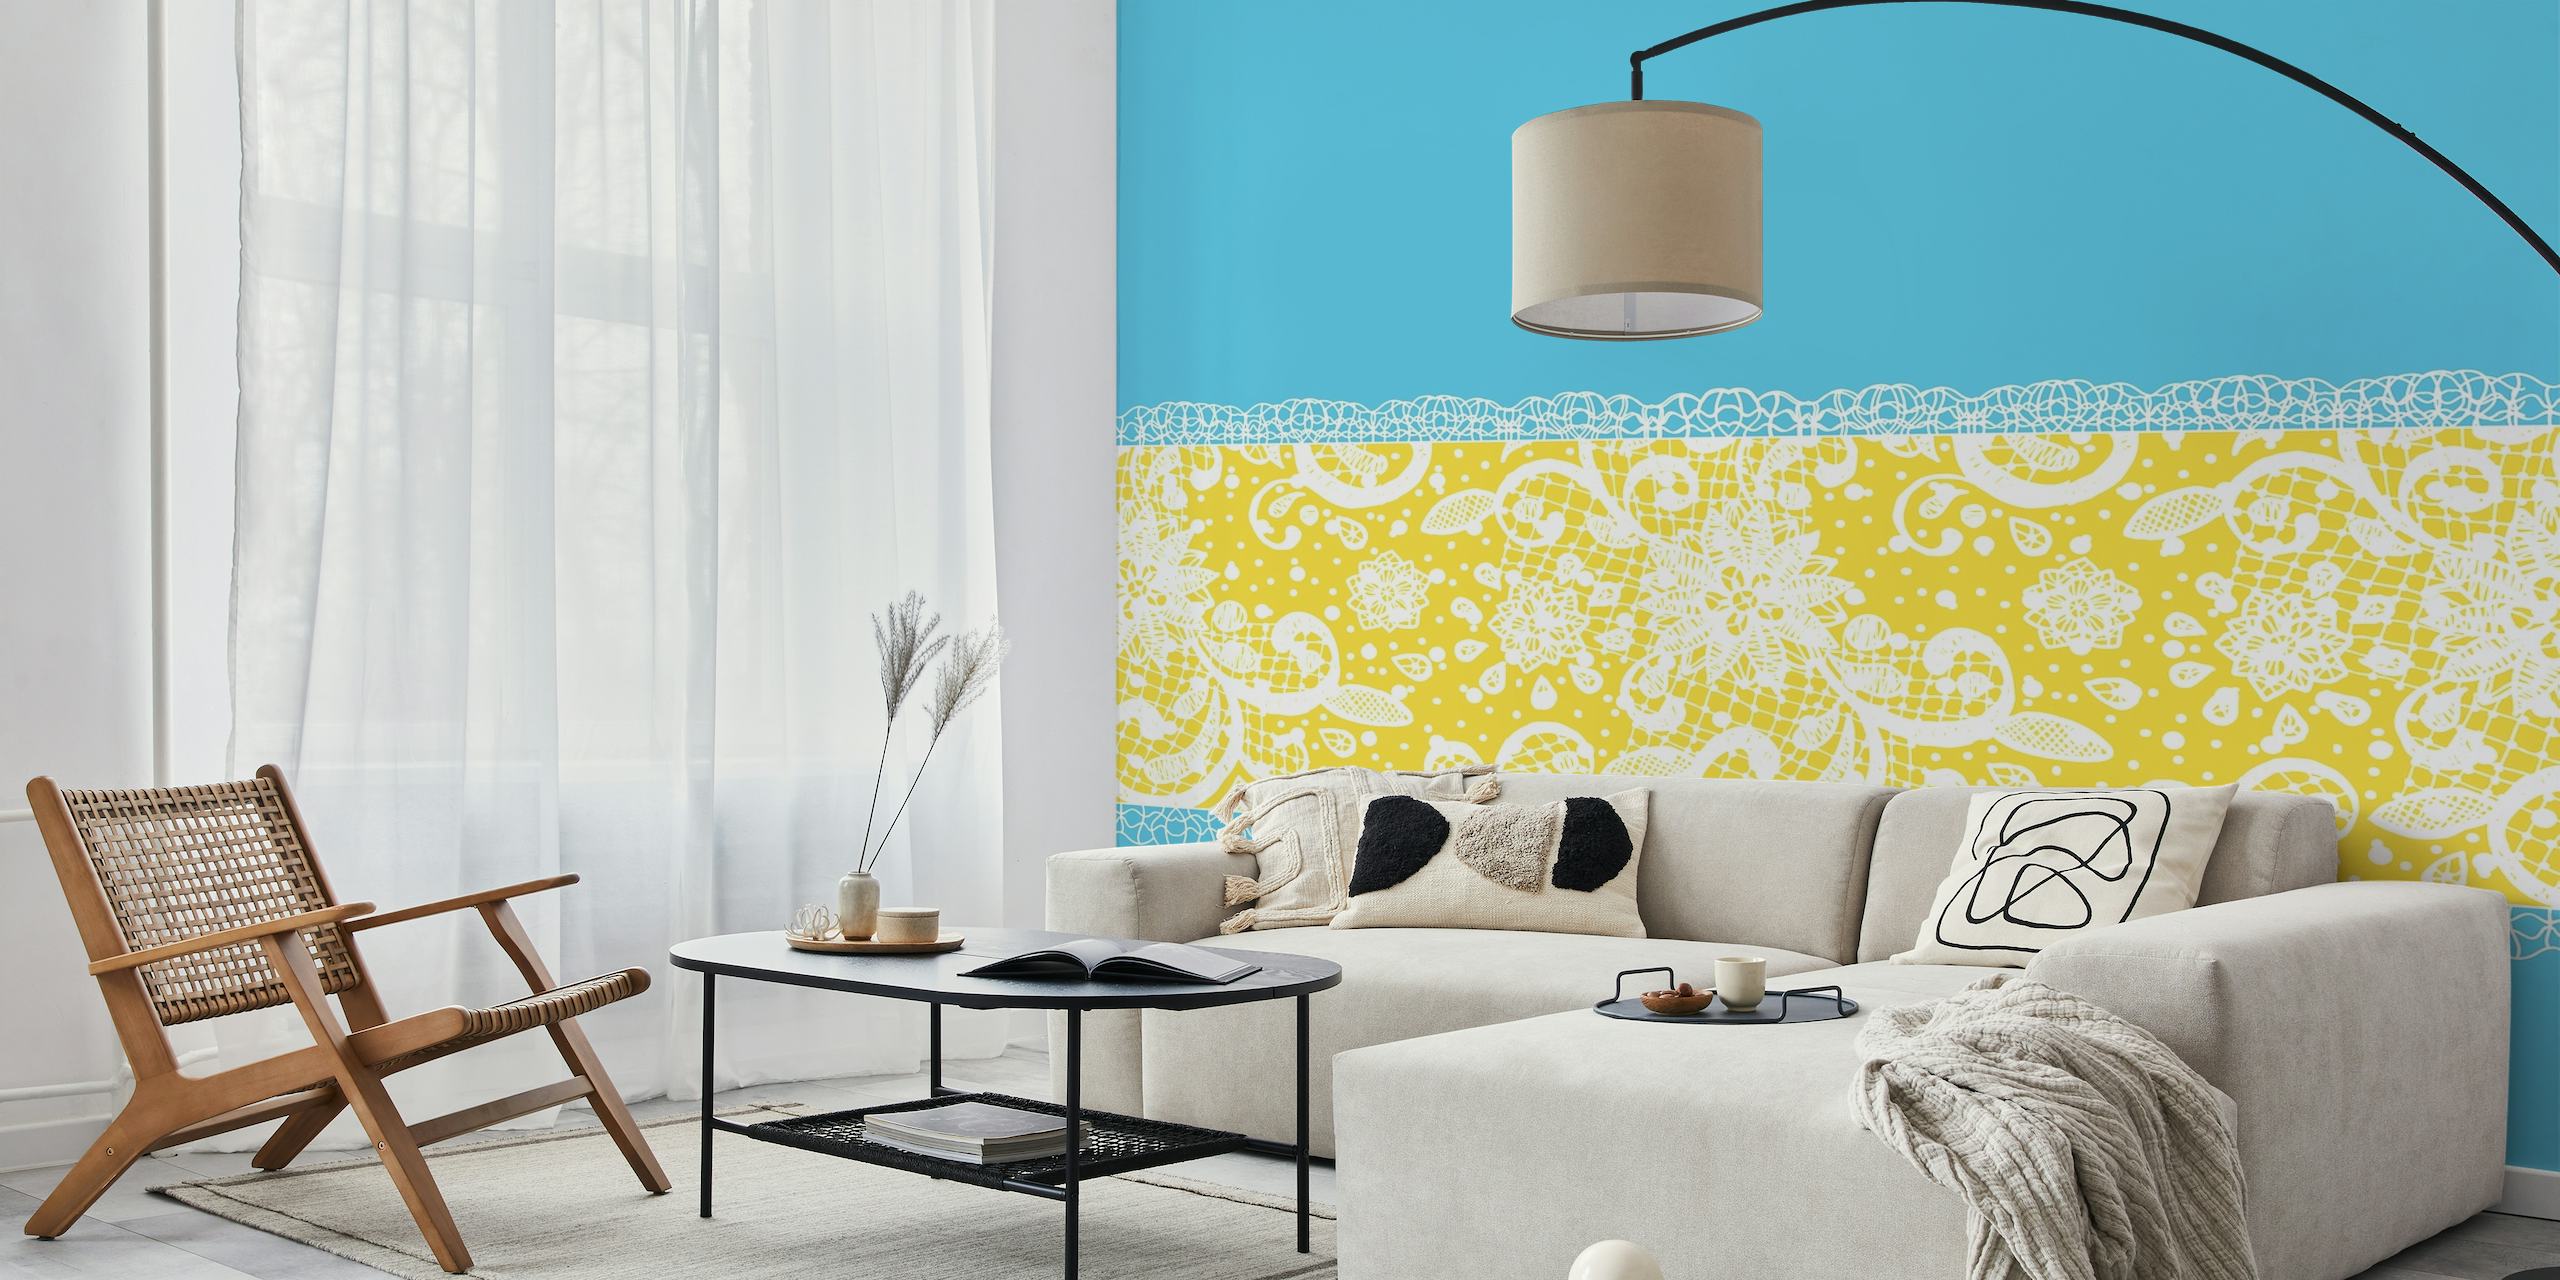 Blue and yellow lace stripe wall mural with intricate patterns